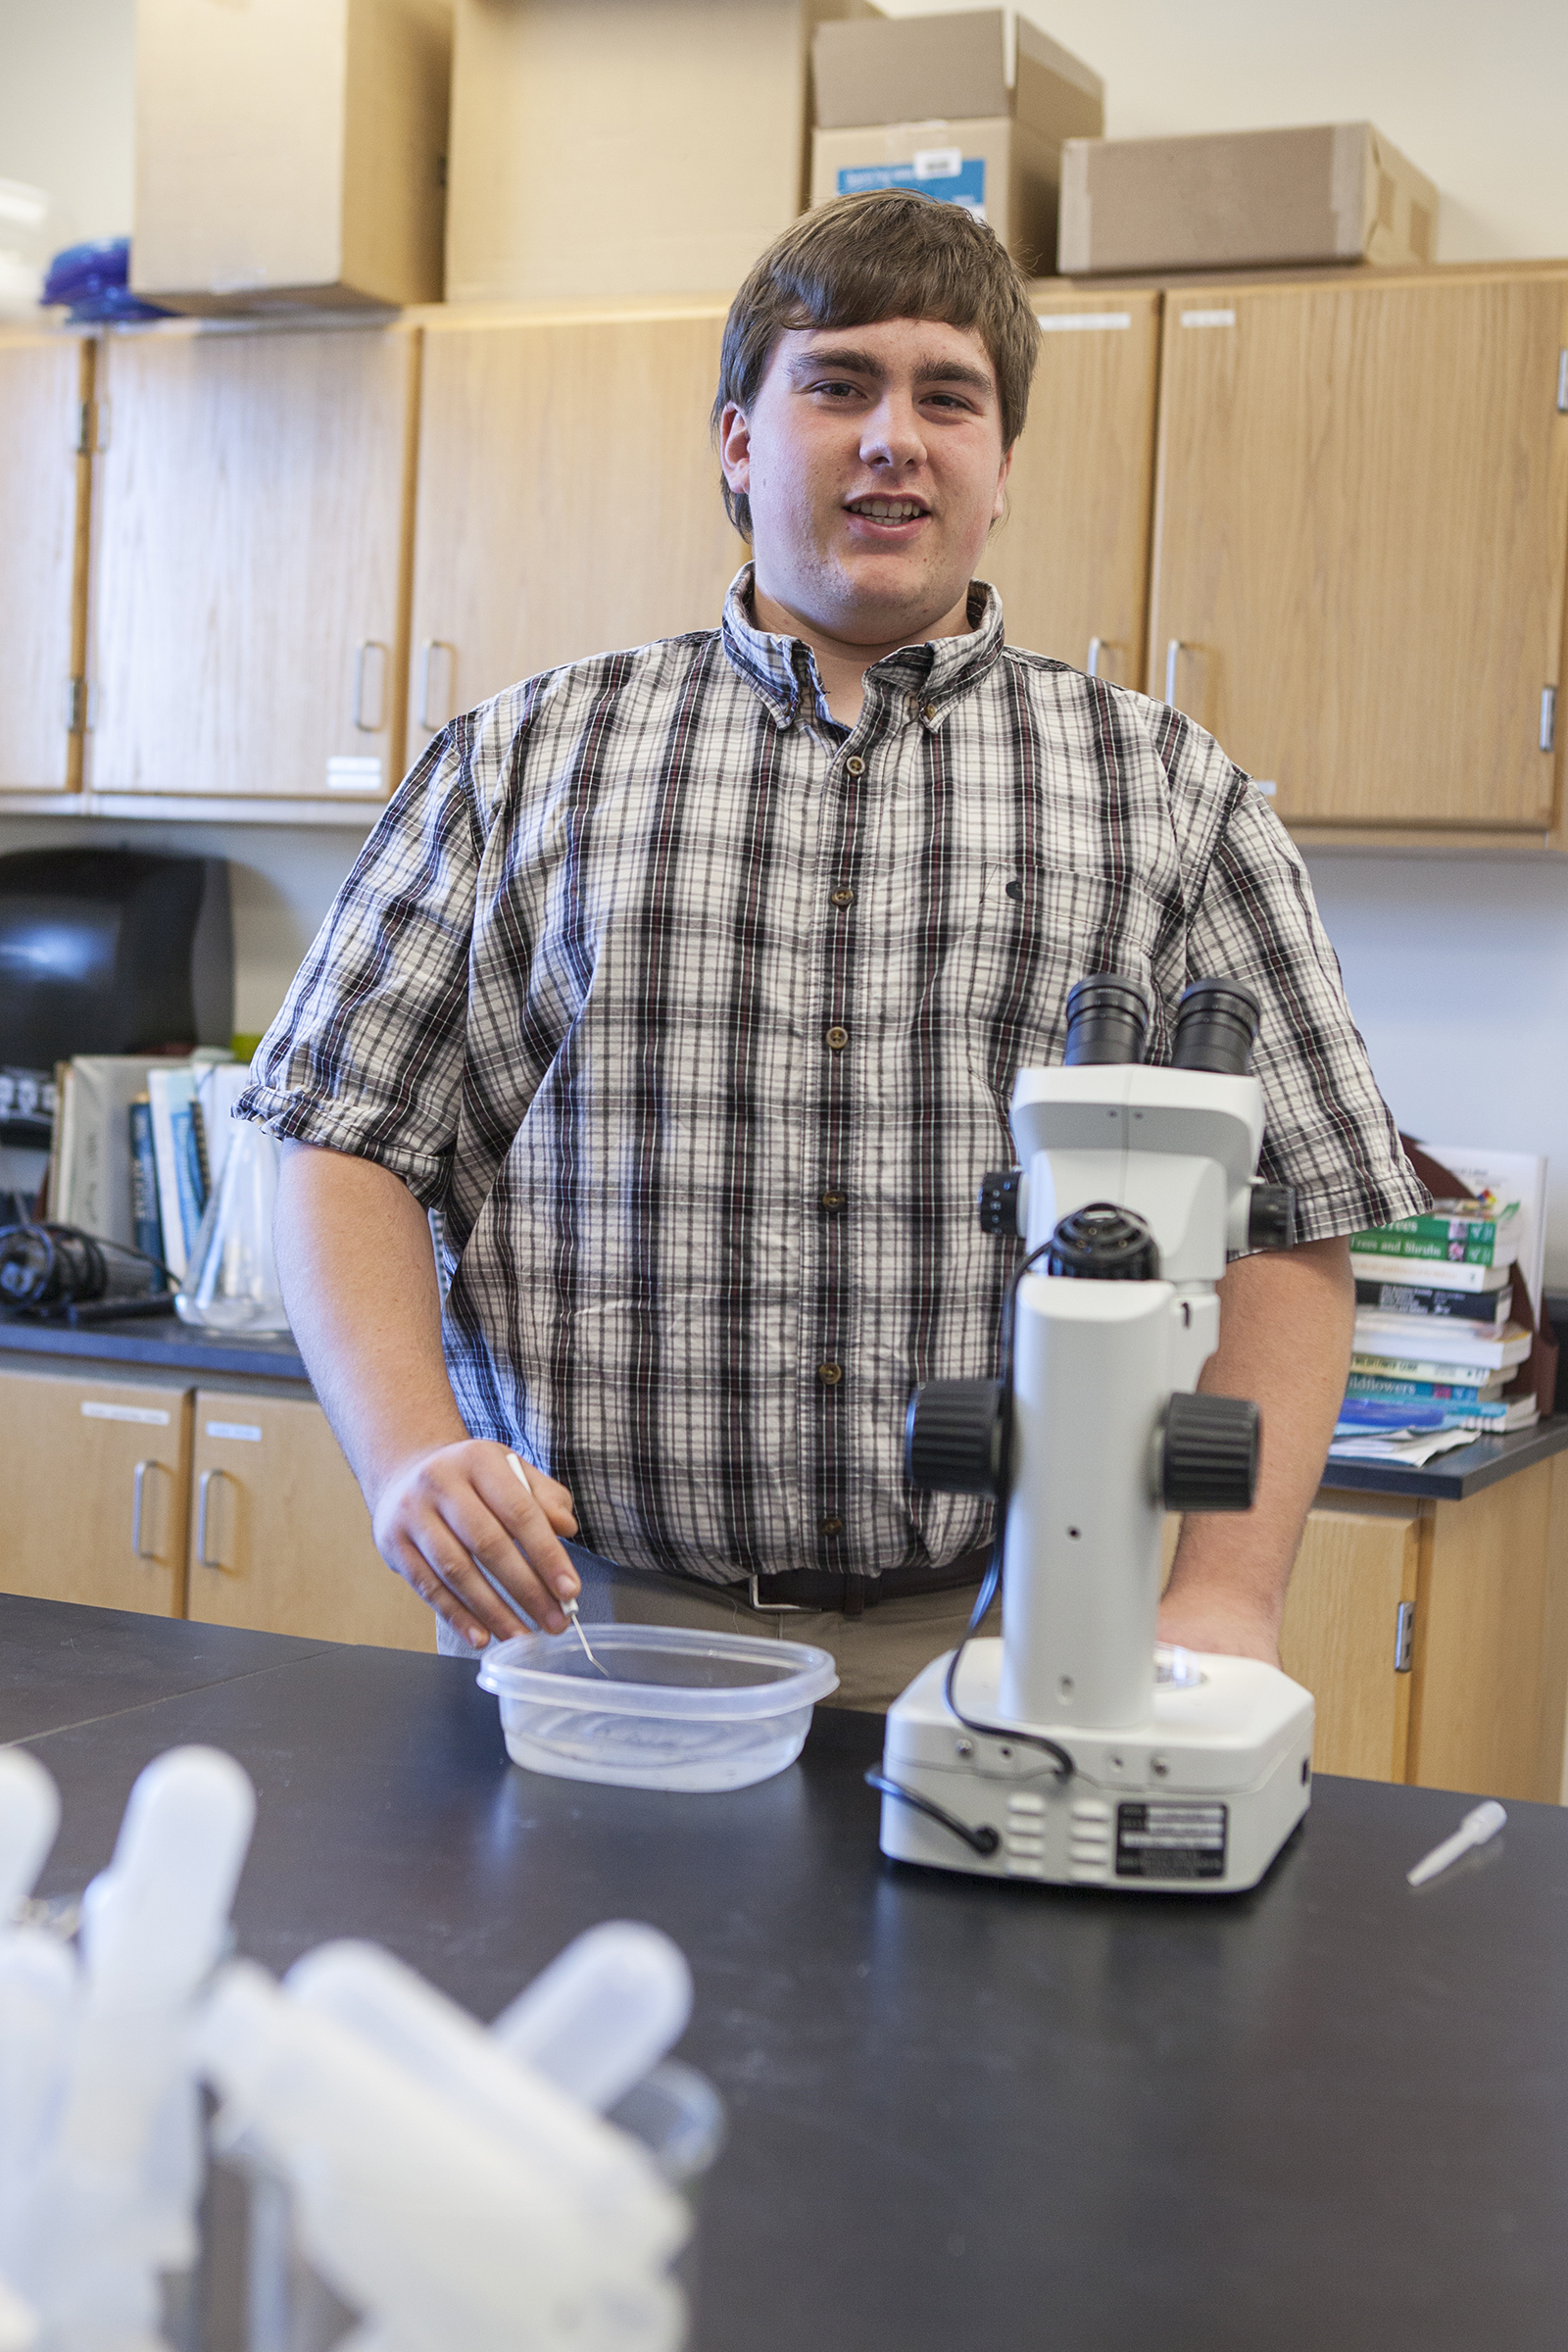 Buena Vista University student Derek Simonsen has received an undergraduate fellowship from the EPA to further his toxicology research on triclosan.